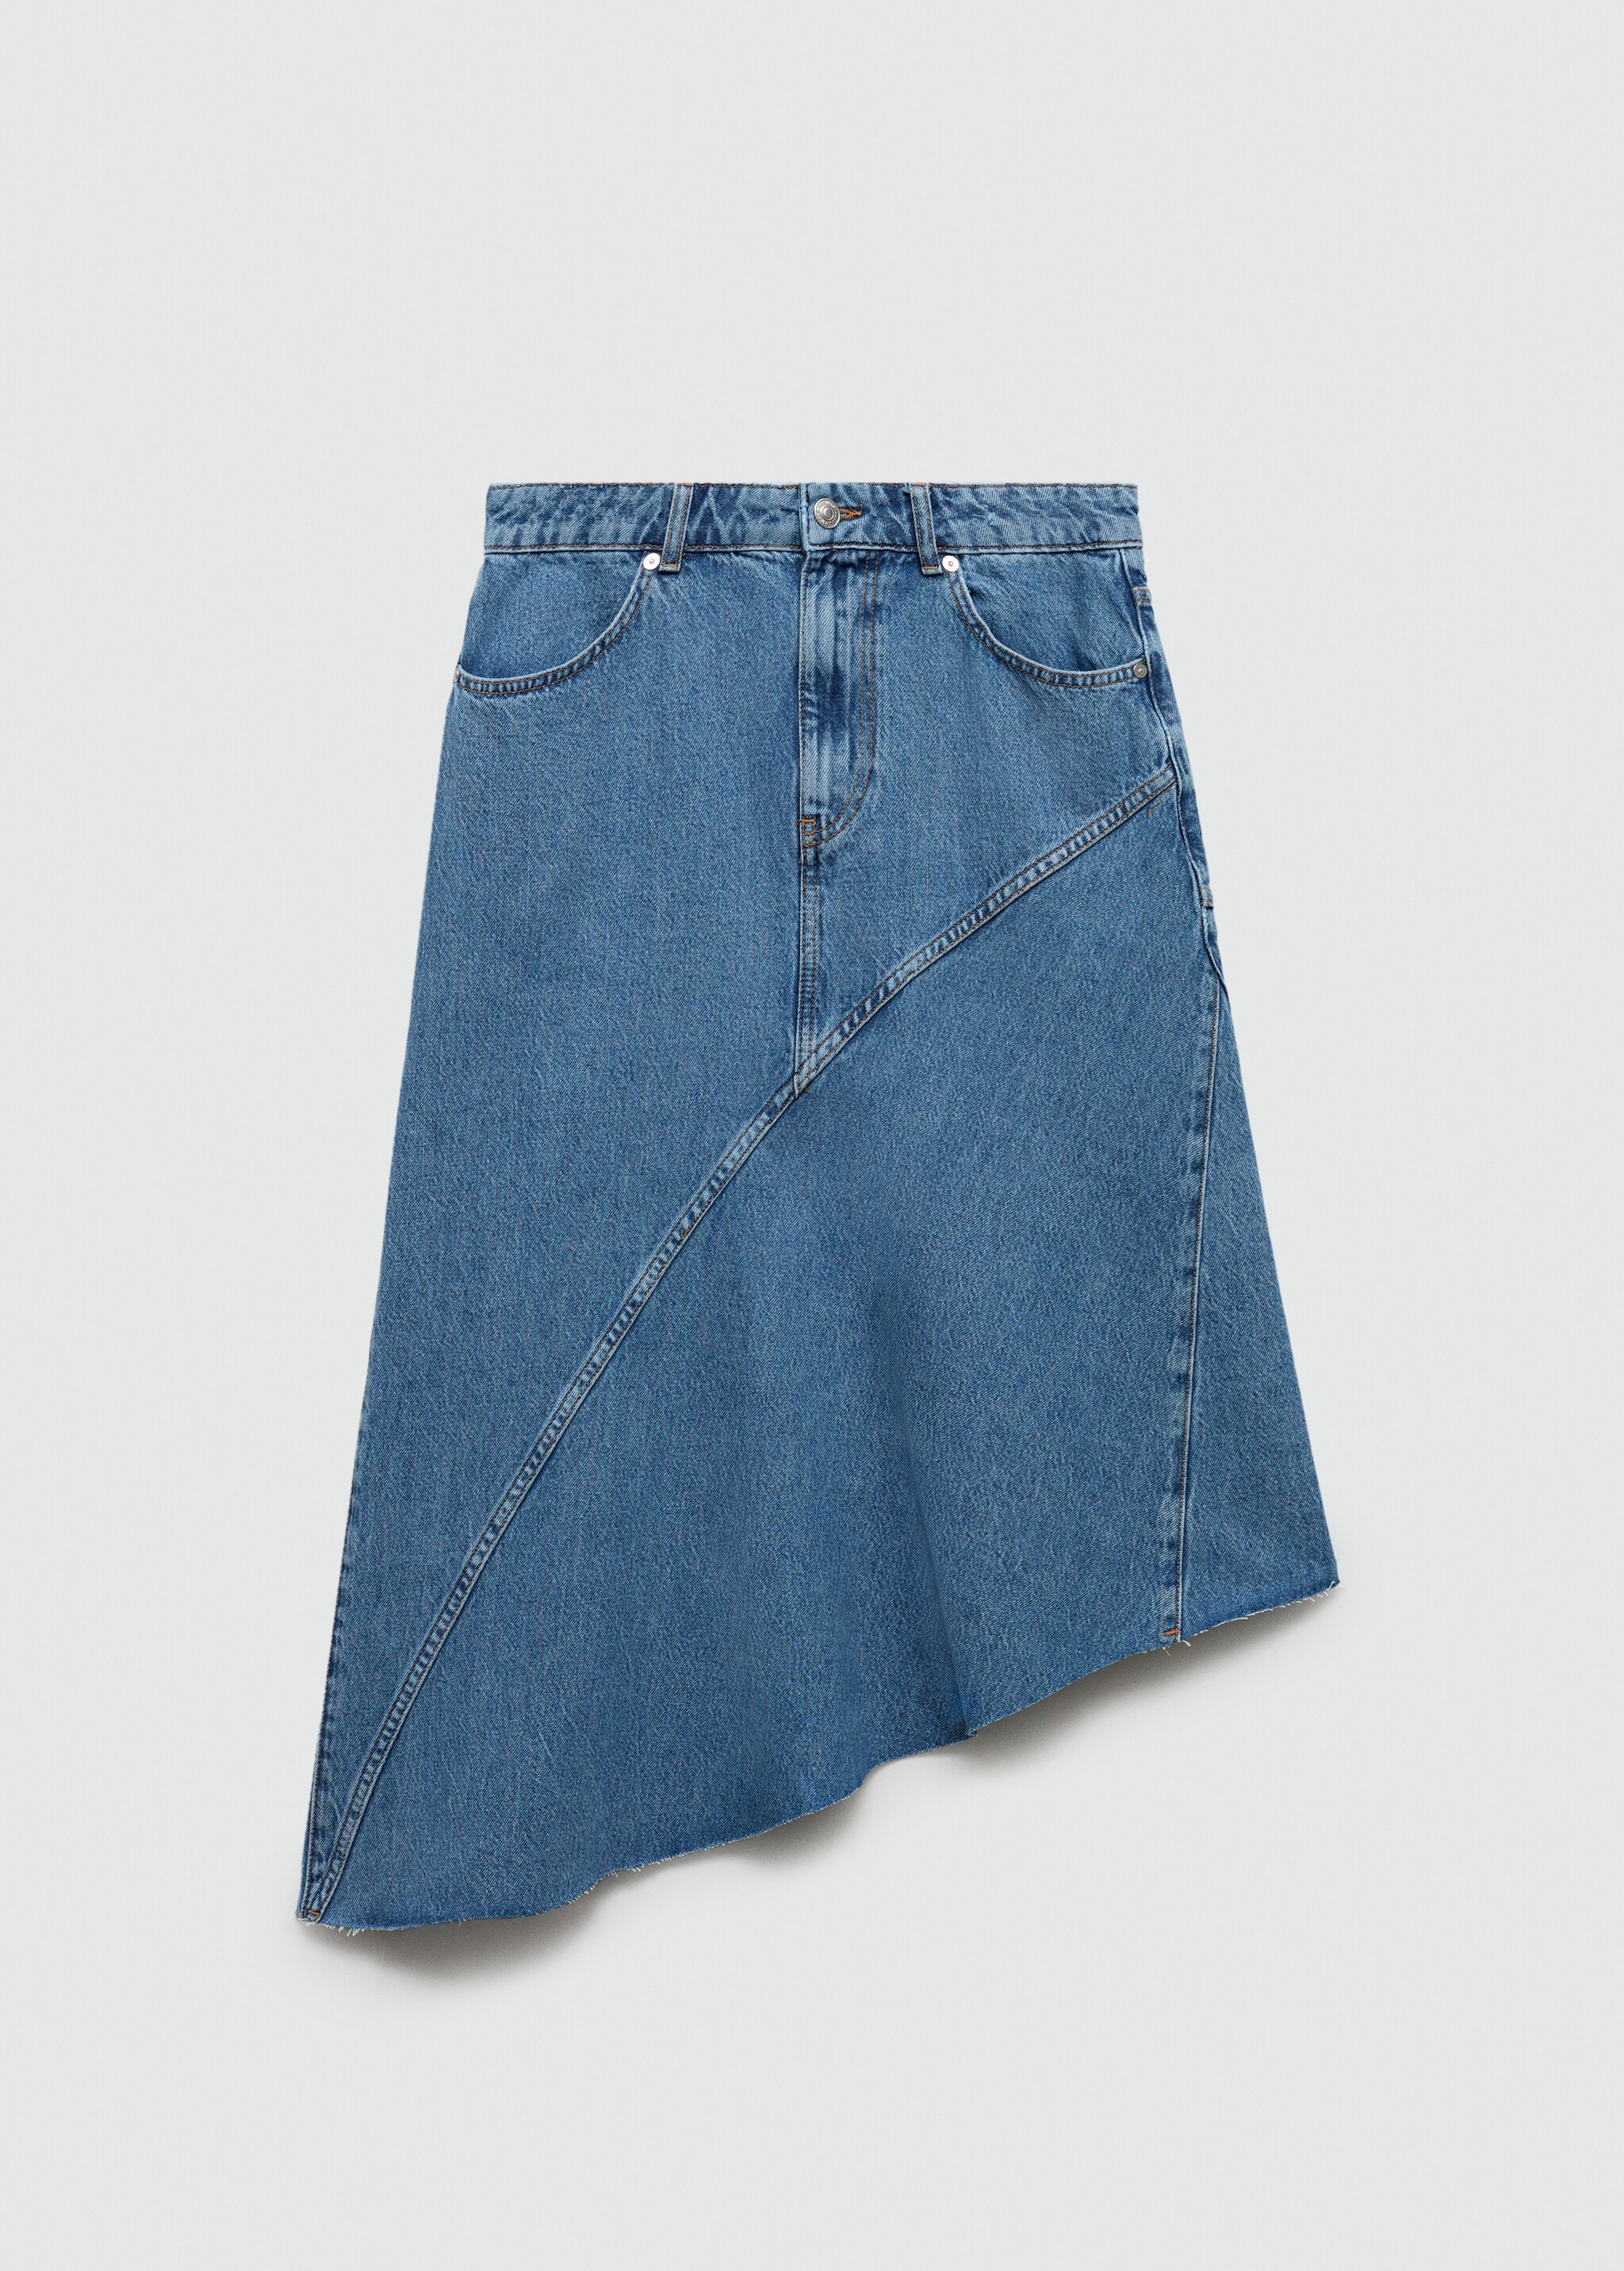 Asymmetrical denim skirt - Article without model